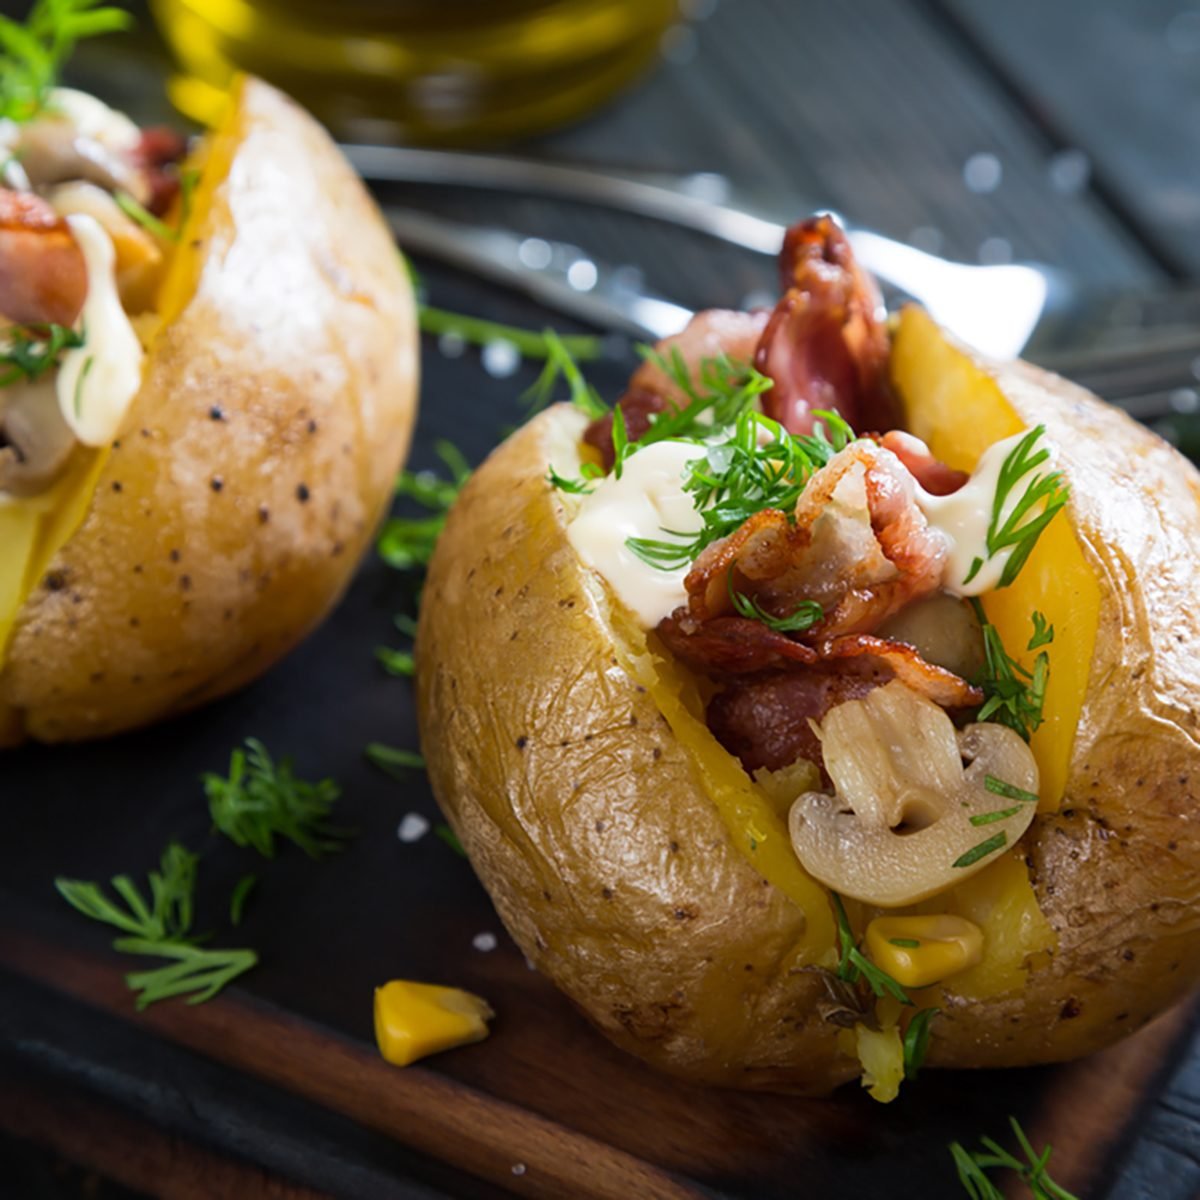 Baked potato with bacon cheese and mushrooms;